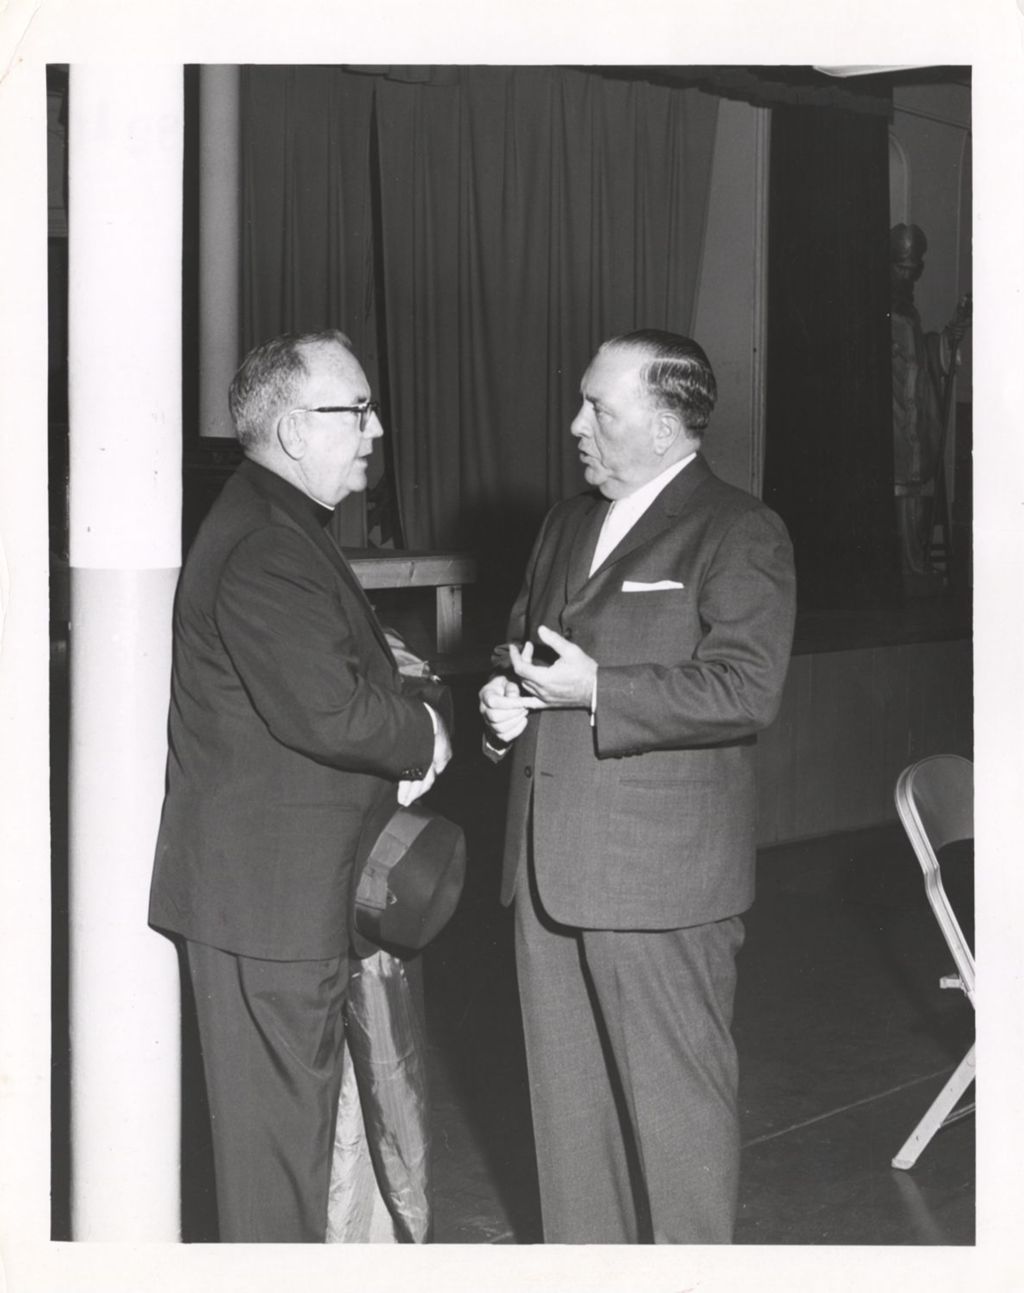 Miniature of Richard J. Daley speaking with a priest